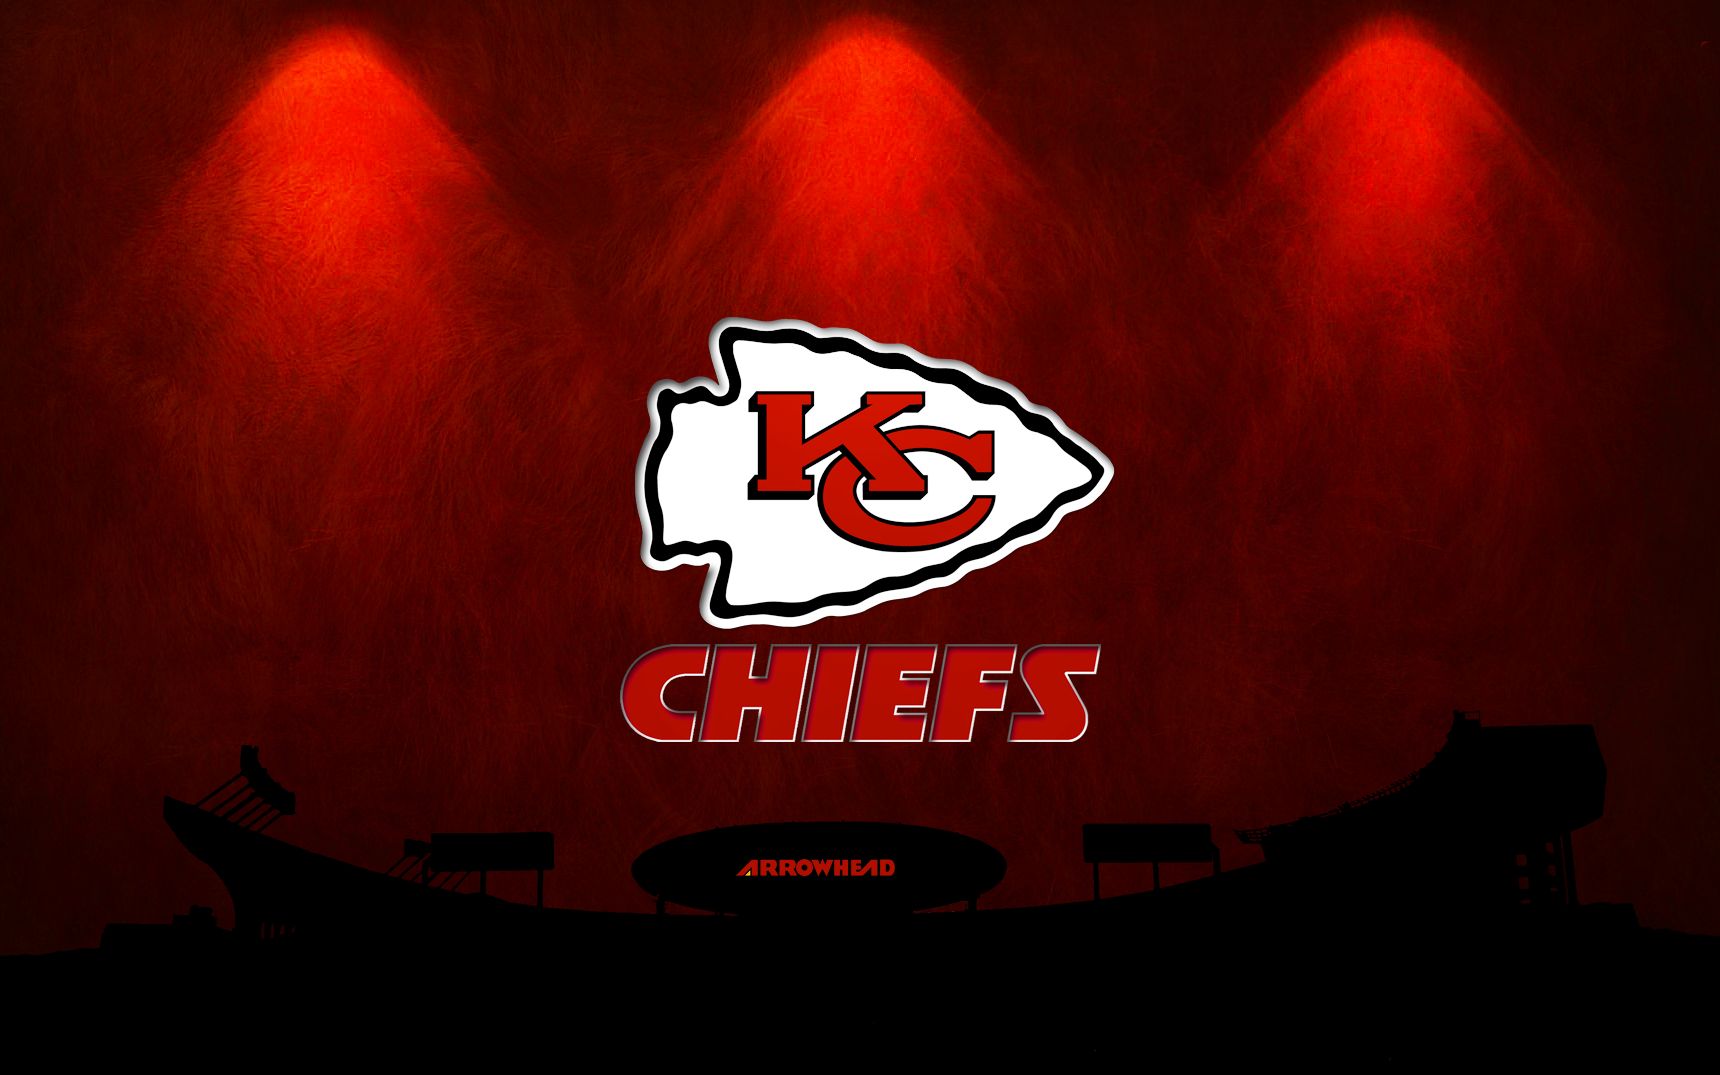 Download Kansas City Chiefs wallpapers for mobile phone free Kansas  City Chiefs HD pictures